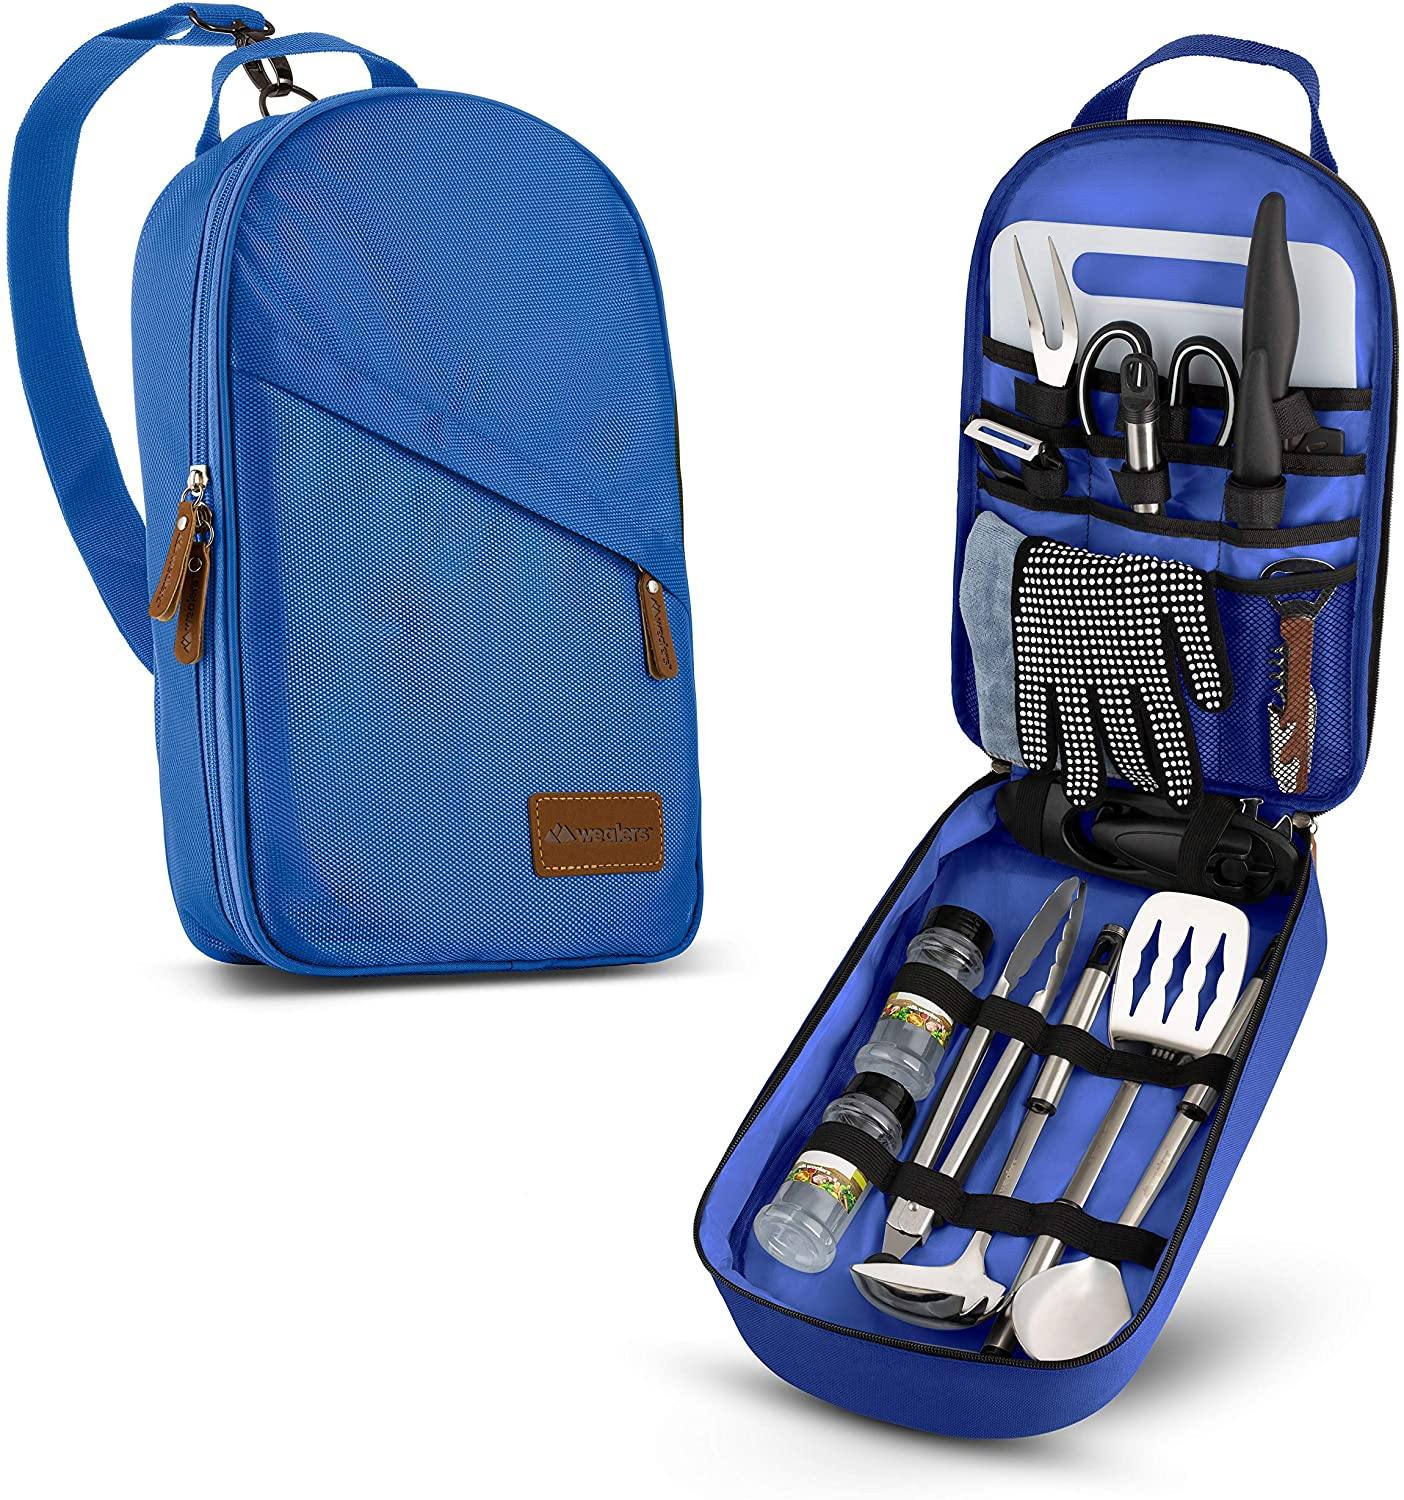 Berglander Camping Essentials, Camping Cooking Utensils Set, Camping  Accessories Gear Must Haves, Come with Camping Silverware Sets, Plates and  Cups